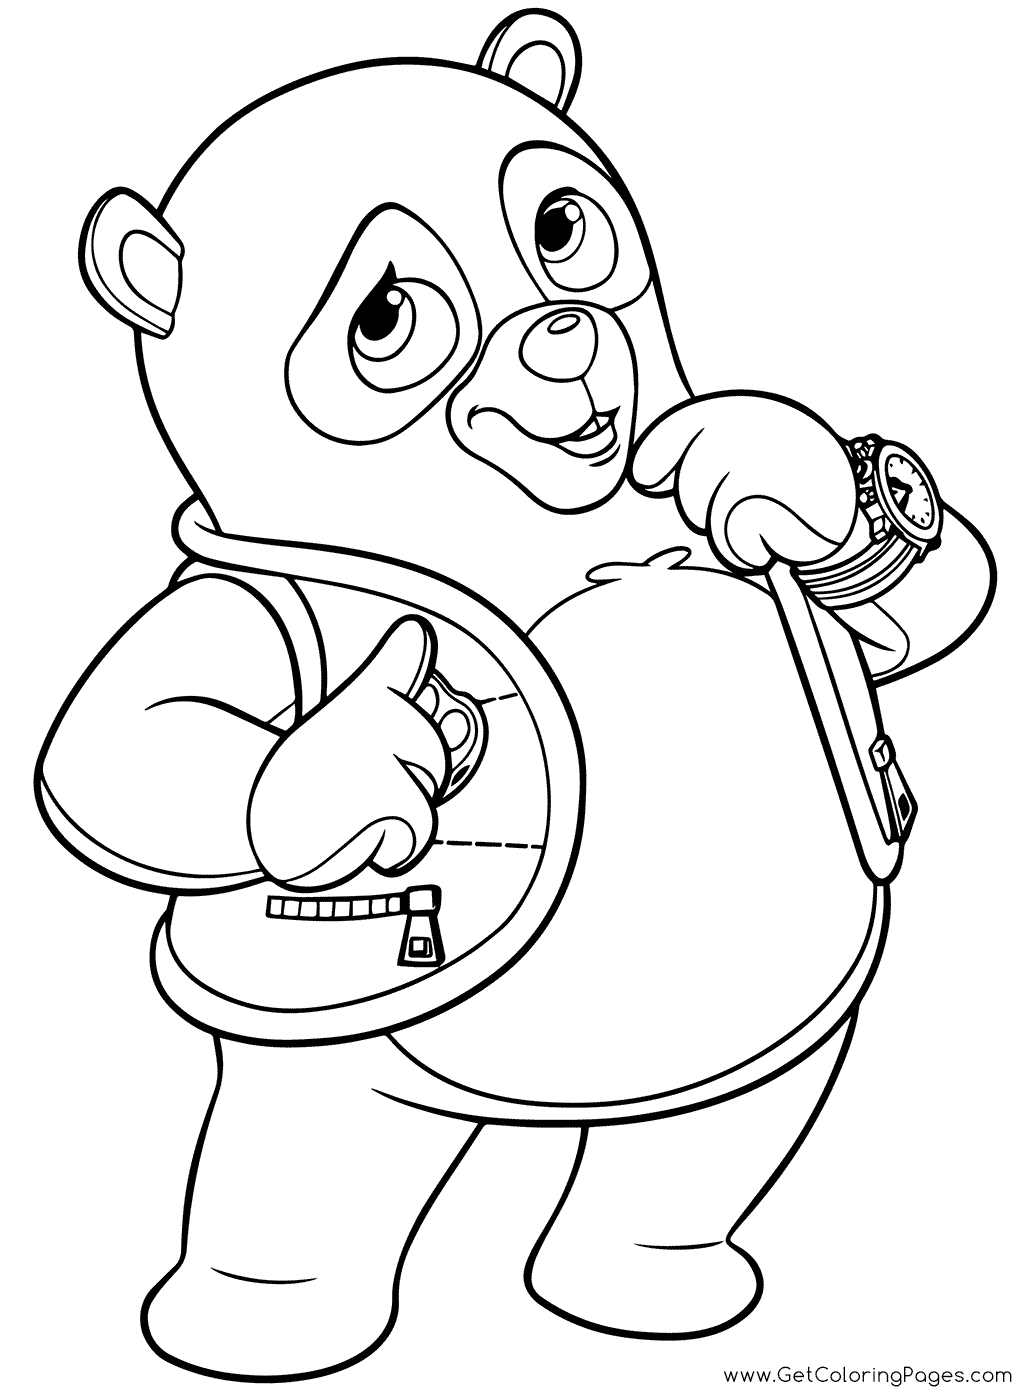 Special Agent Oso Coloring Pages - GetColoringPages.com